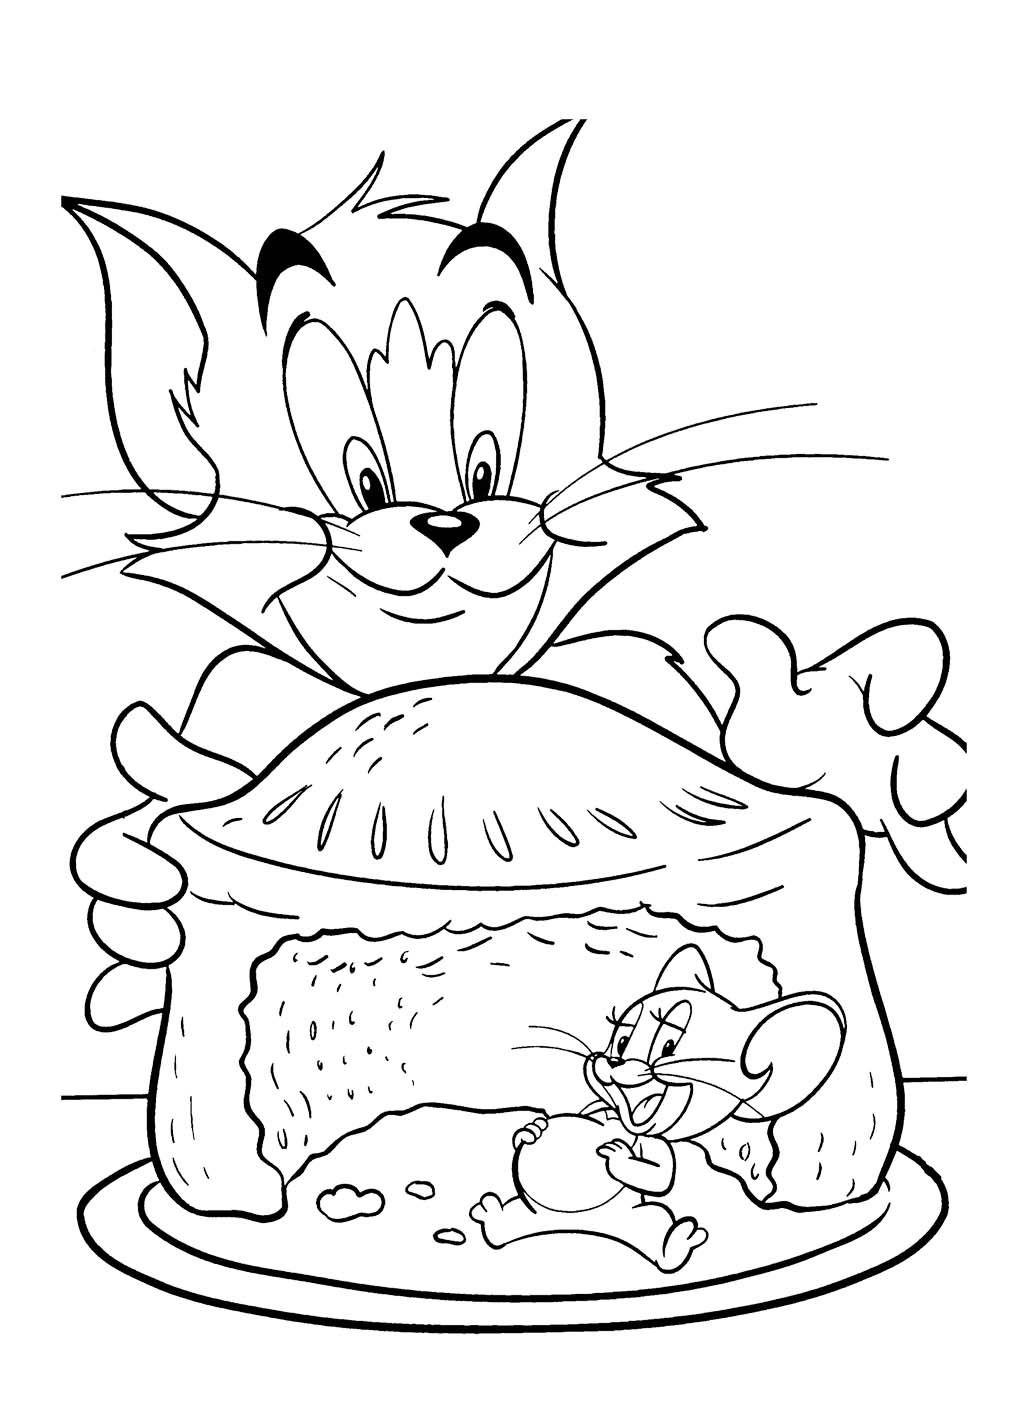 Tom Jerry Pencil Drawings Coloring Page 01 | Tom And Jerry Coloring - Free Printable Pencil Drawings